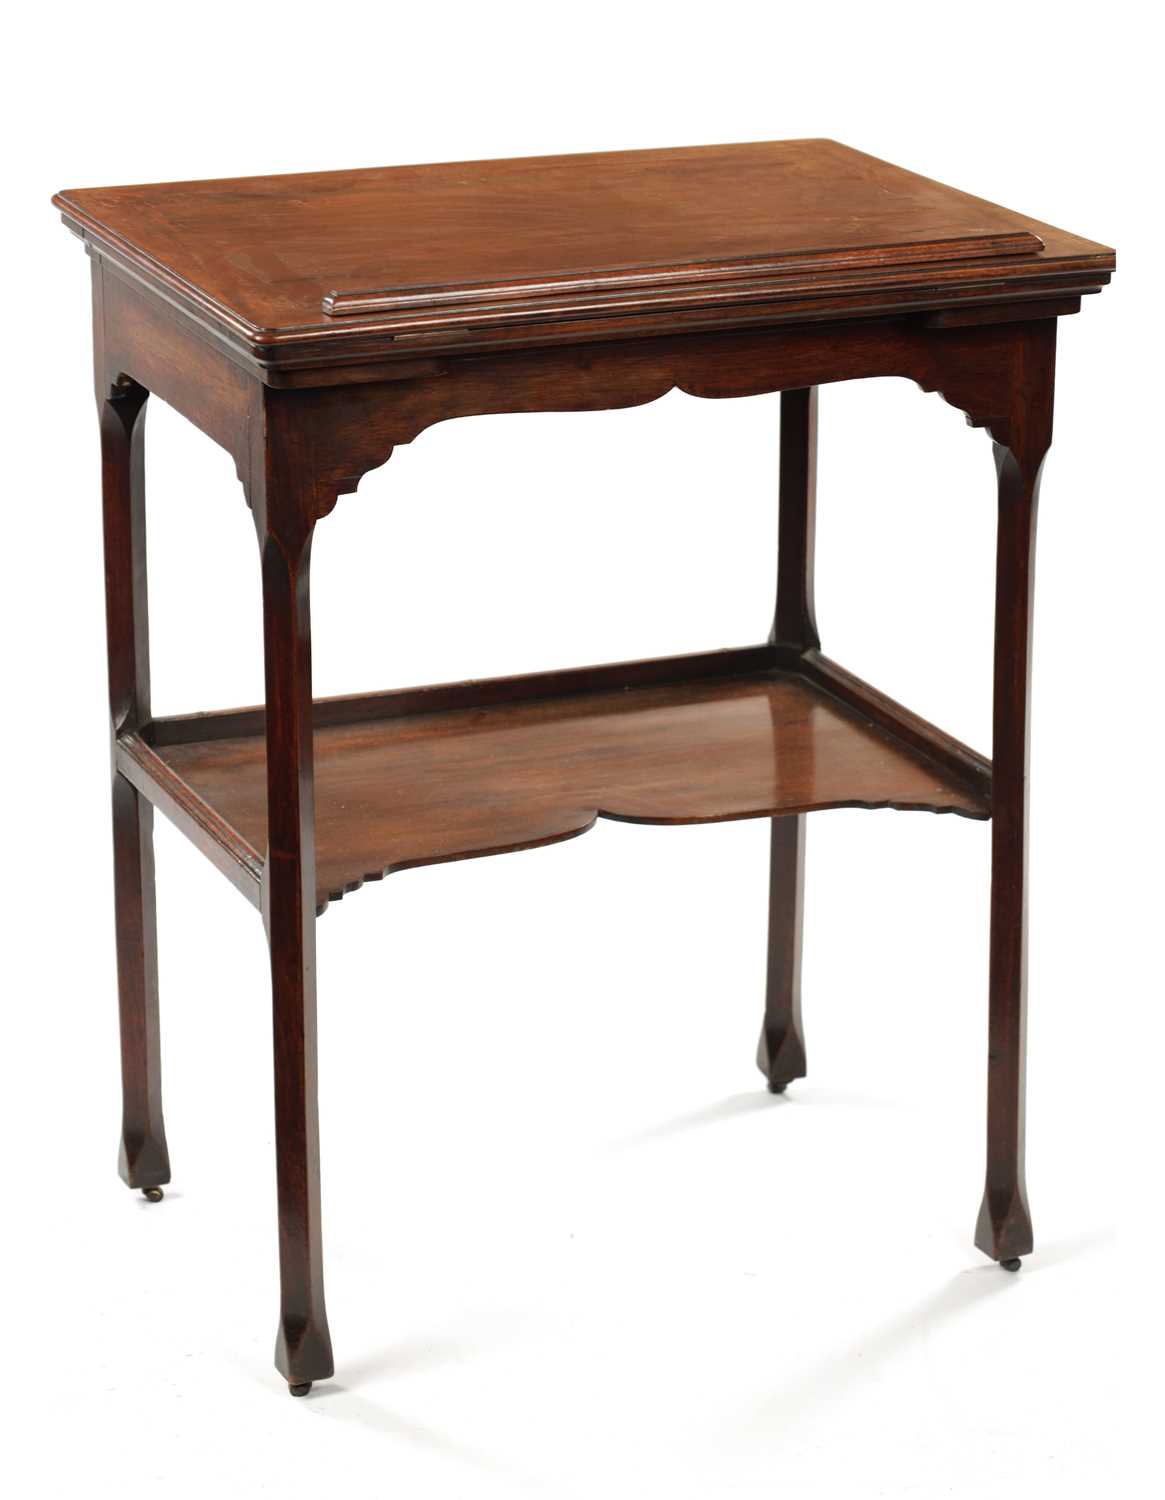 A RARE AND UNUSUAL GEORGE II MAHOGANY ARTIST’S TABLE IN THE MANNER OF THOMAS CHIPPENDALE - Image 10 of 14